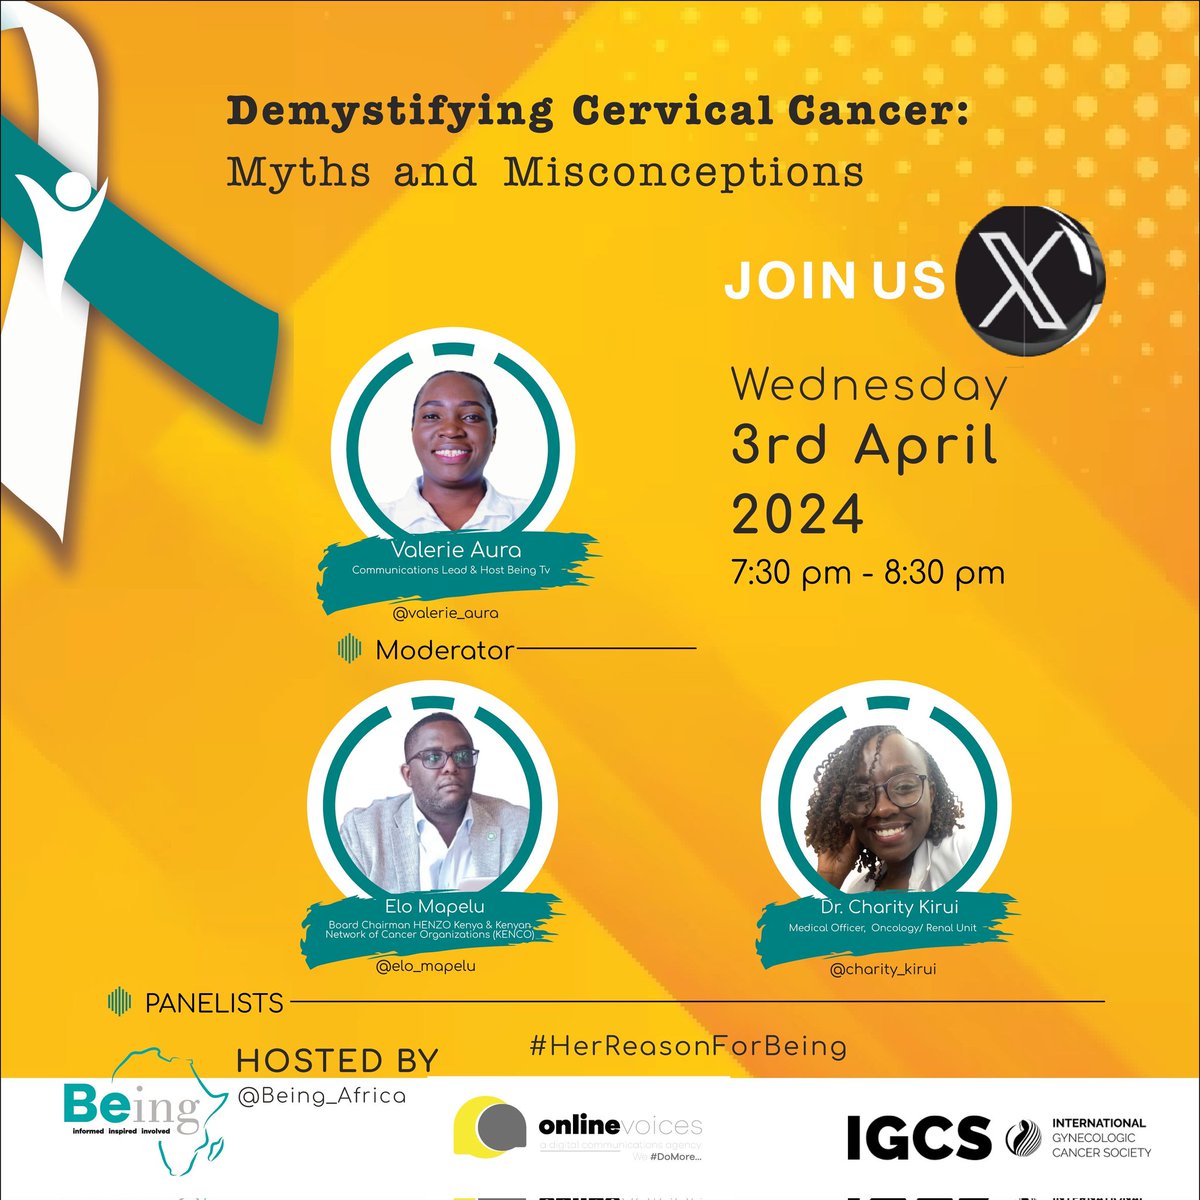 It's time to unravel the truths behind #CervicalCancer. Join us this Wednesday at 7:30 PM EAT for an enlightening #HerReasonForBeing  X Space discussion. Let's clear up myths & misconceptions and pave the way for better awareness. 
#HerReasonForBeing
#CervicalCancerAwareness